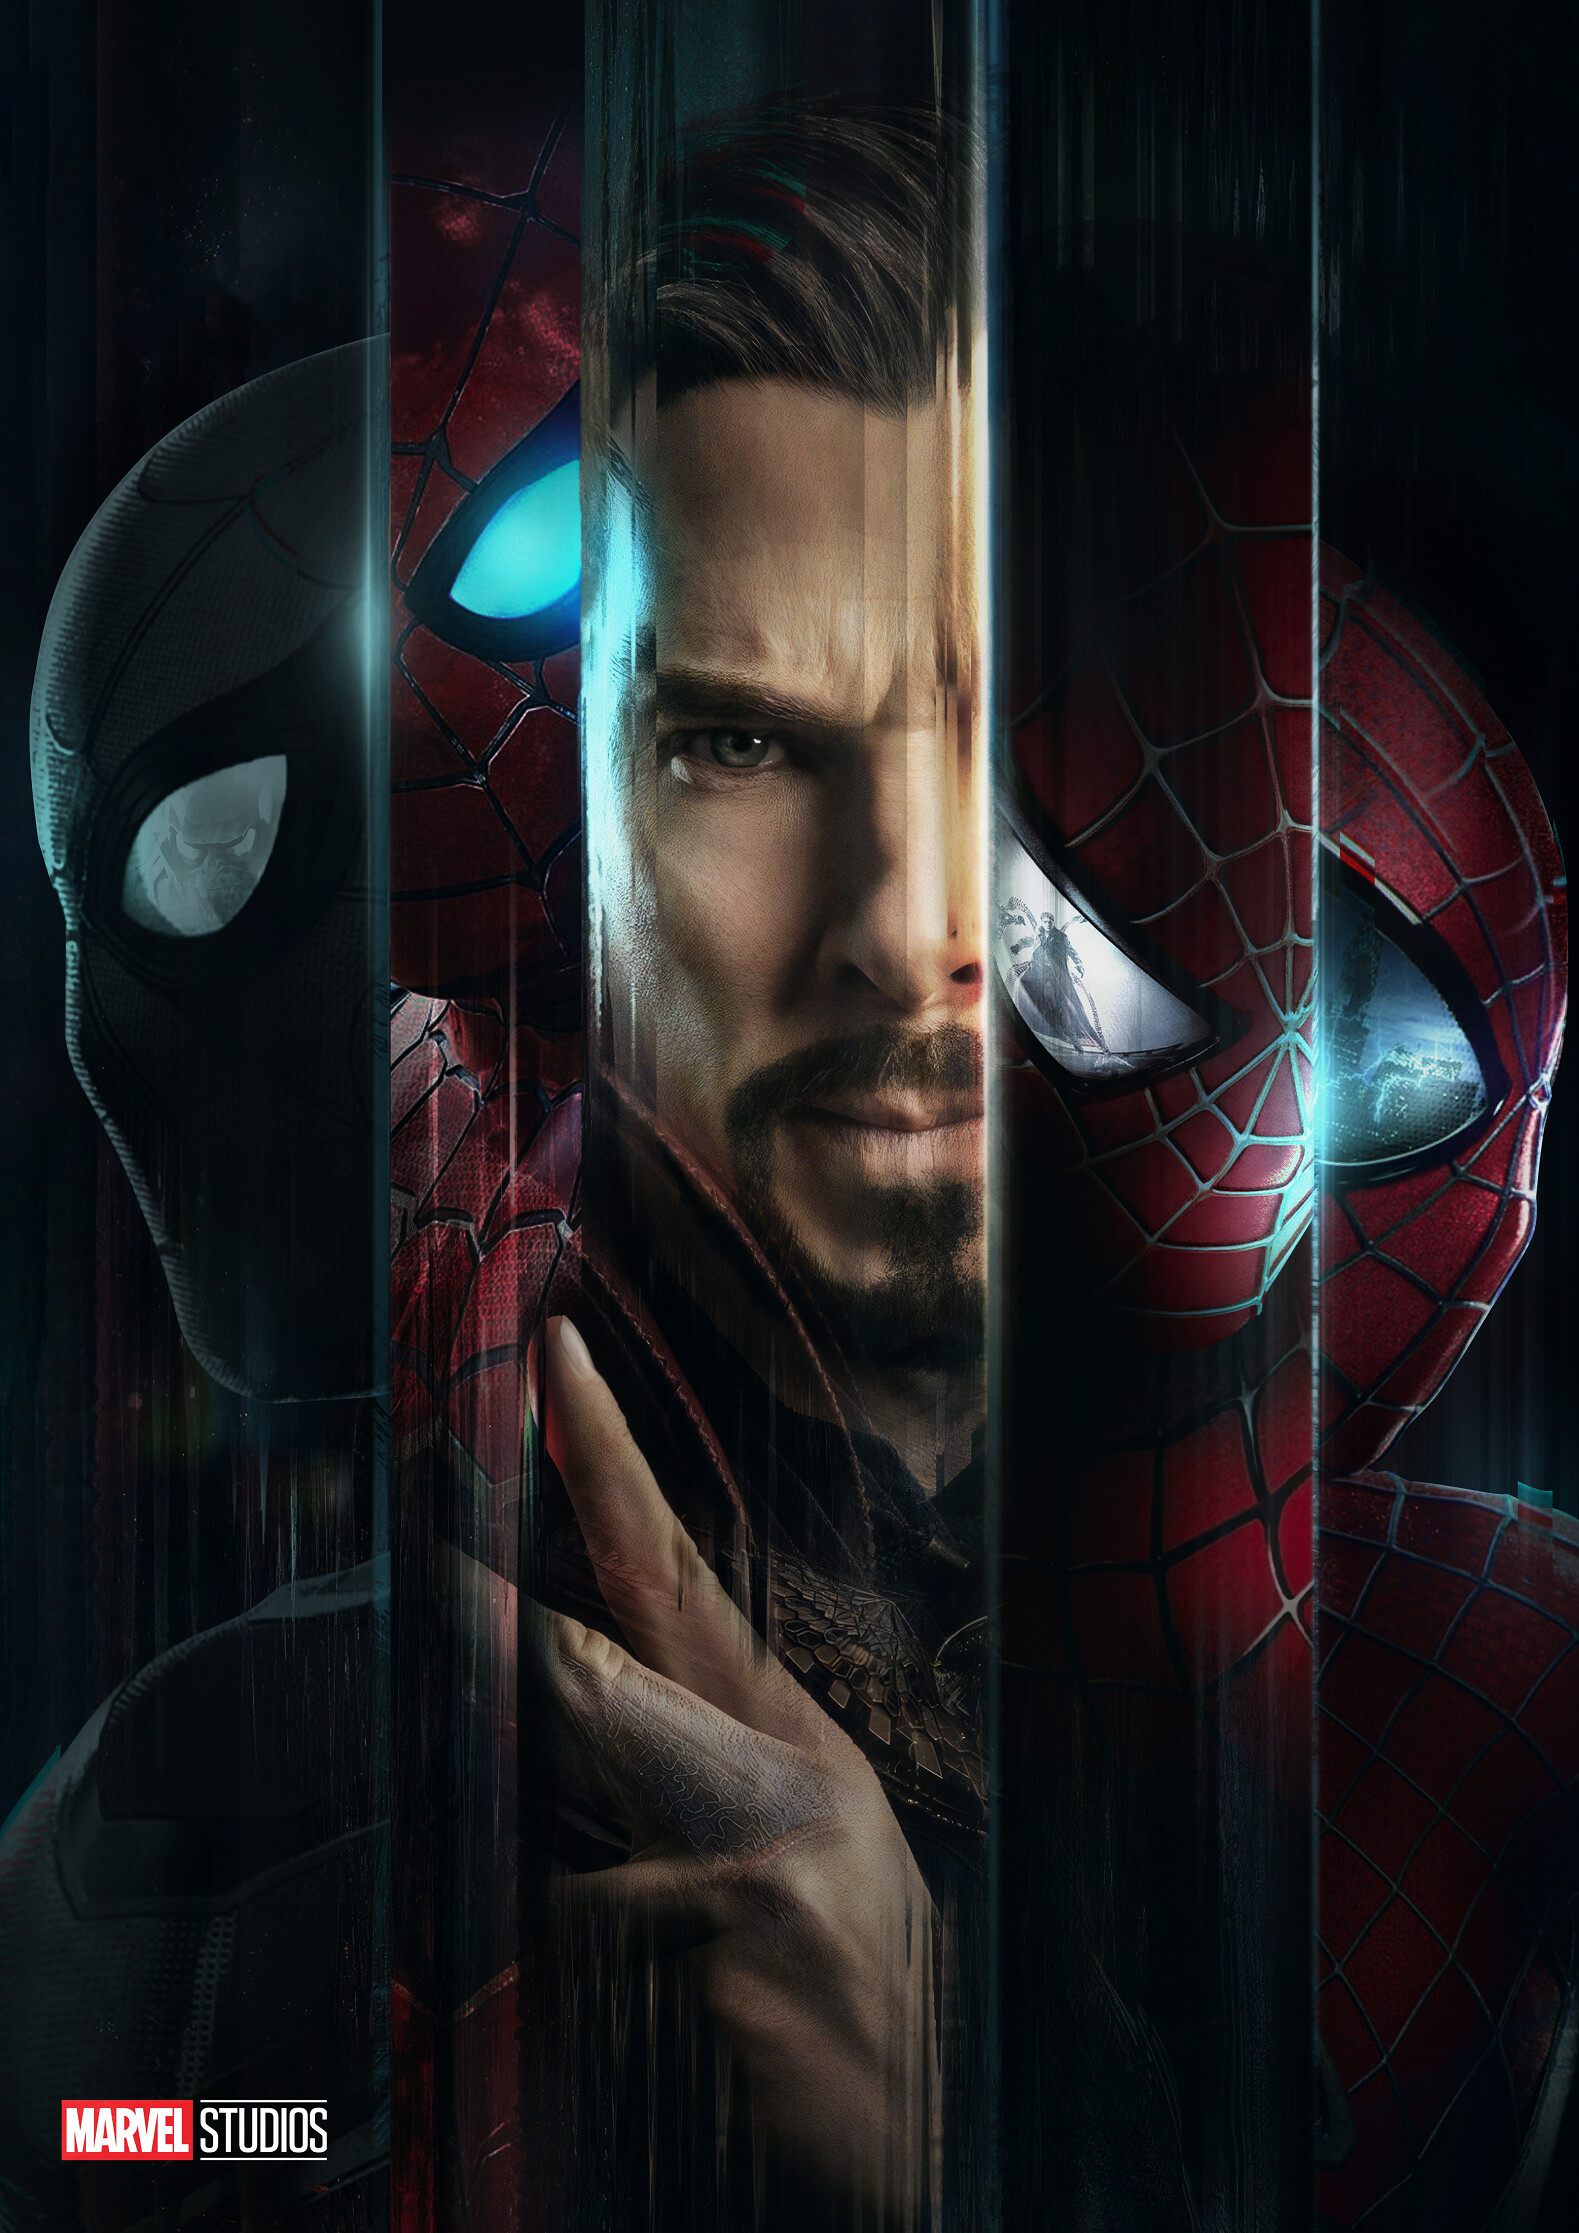 General 1579x2233 Spider-Man: No Way Home Mizuri AU Doctor Strange Peter Parker Tom Holland Tobey Maguire Andrew Garfield Spider-Man Marvel Comics movie characters mask spider wizard Marvel Super Heroes suits beard Black suited Spiderman movies portrait display Marvel Cinematic Universe